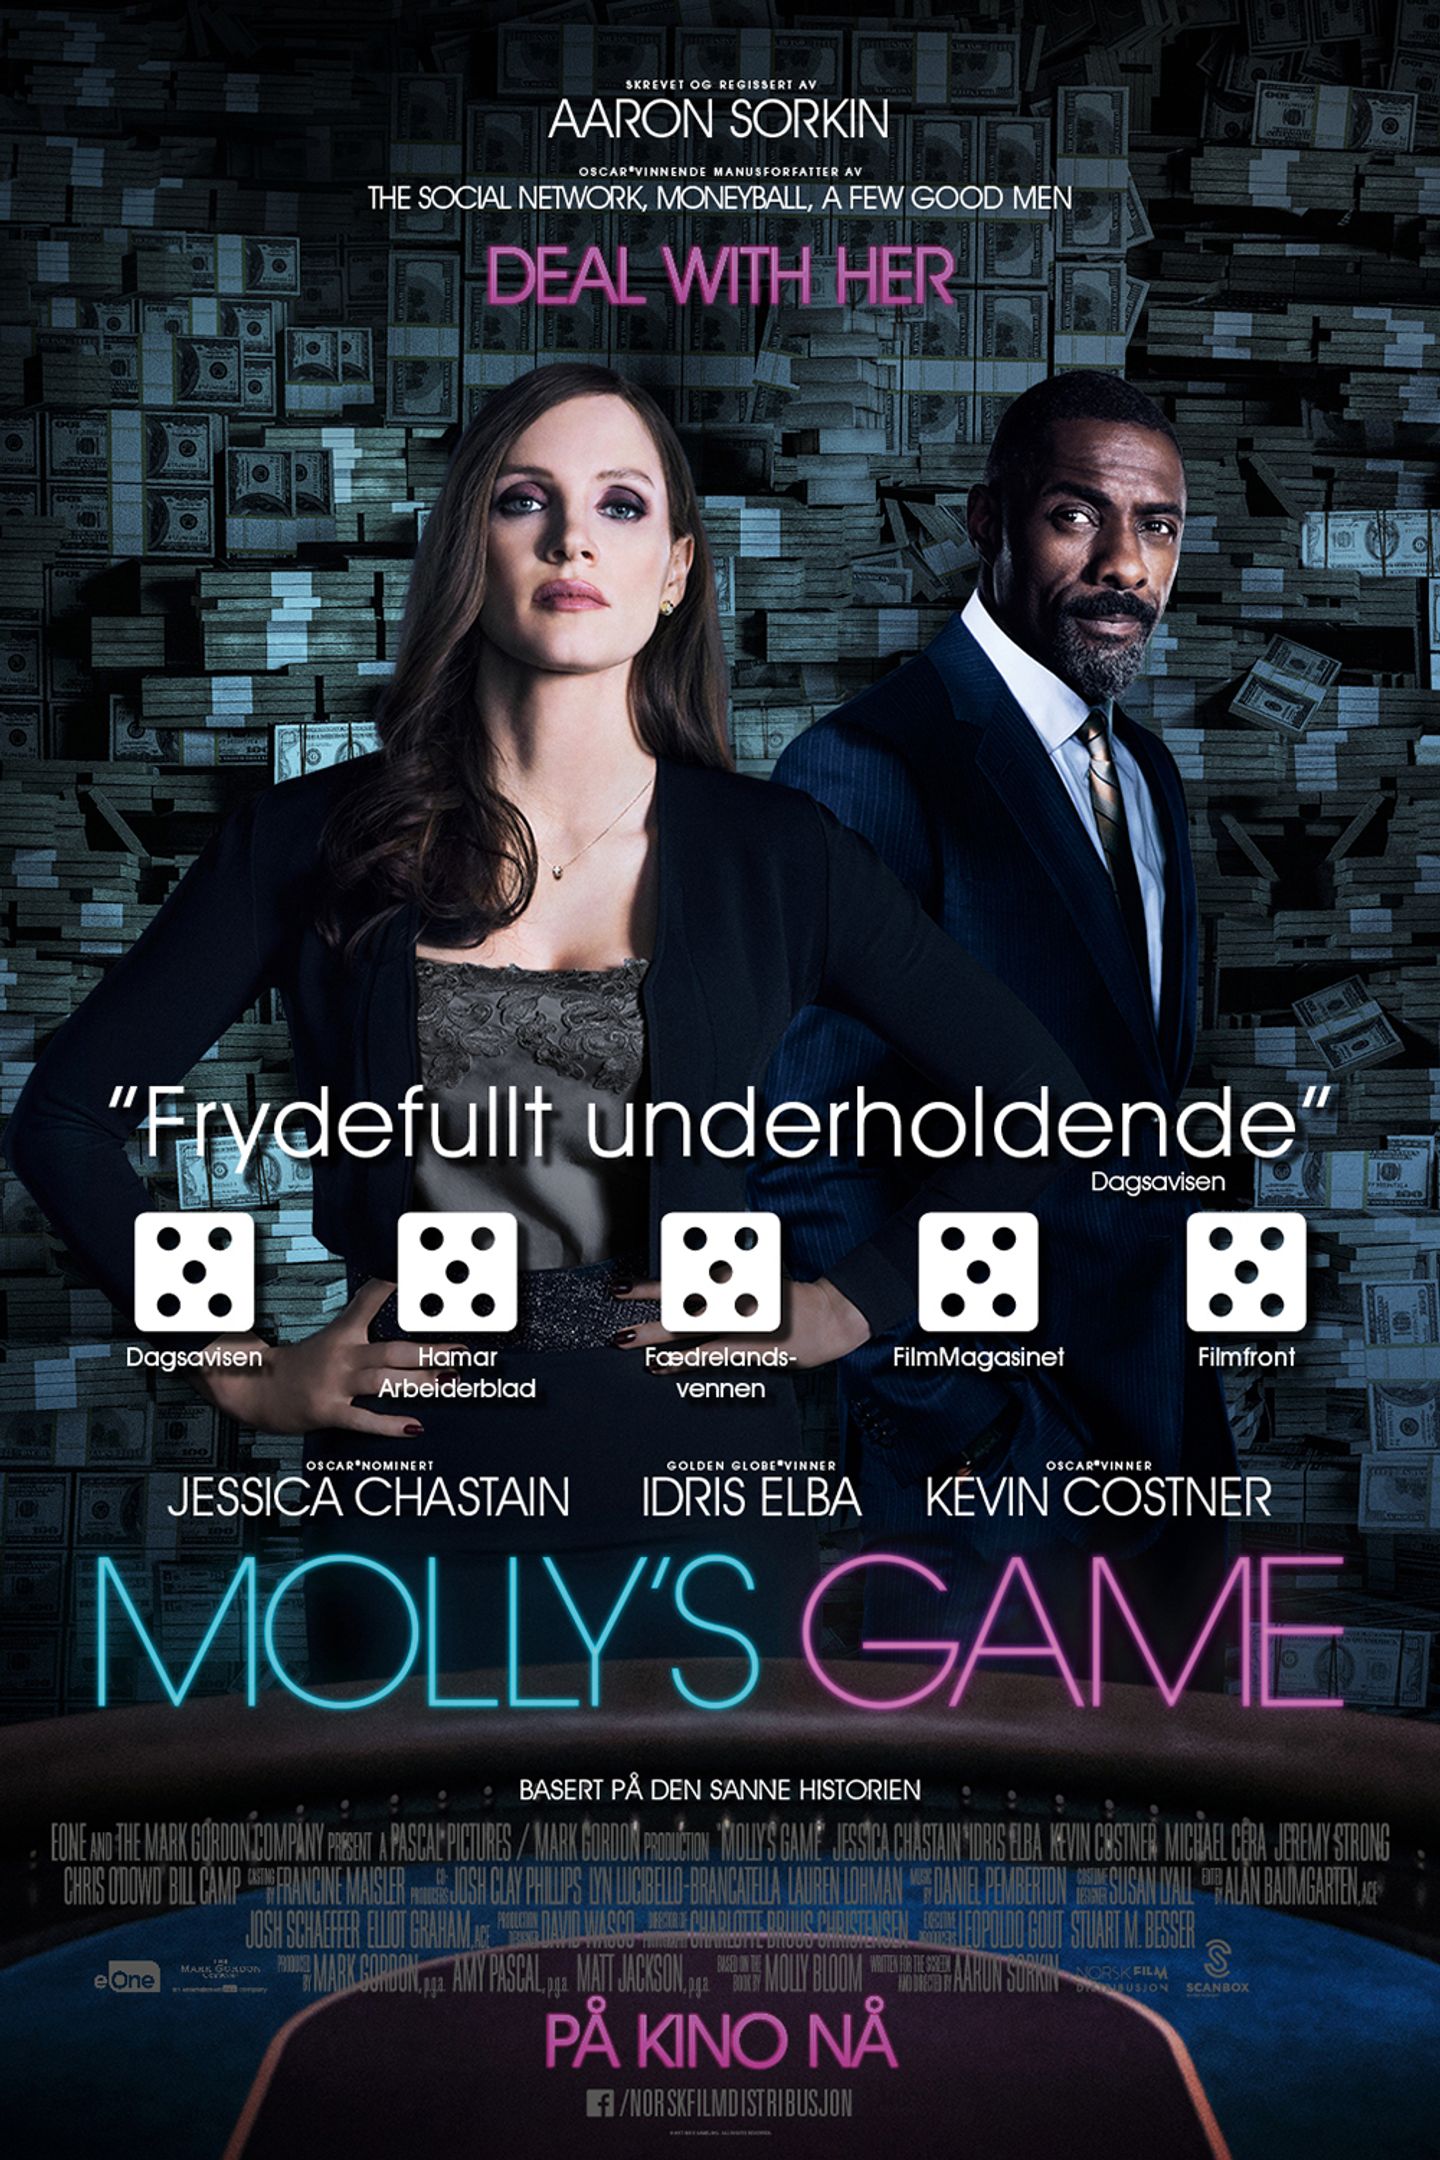 Plakat for 'Molly's game'